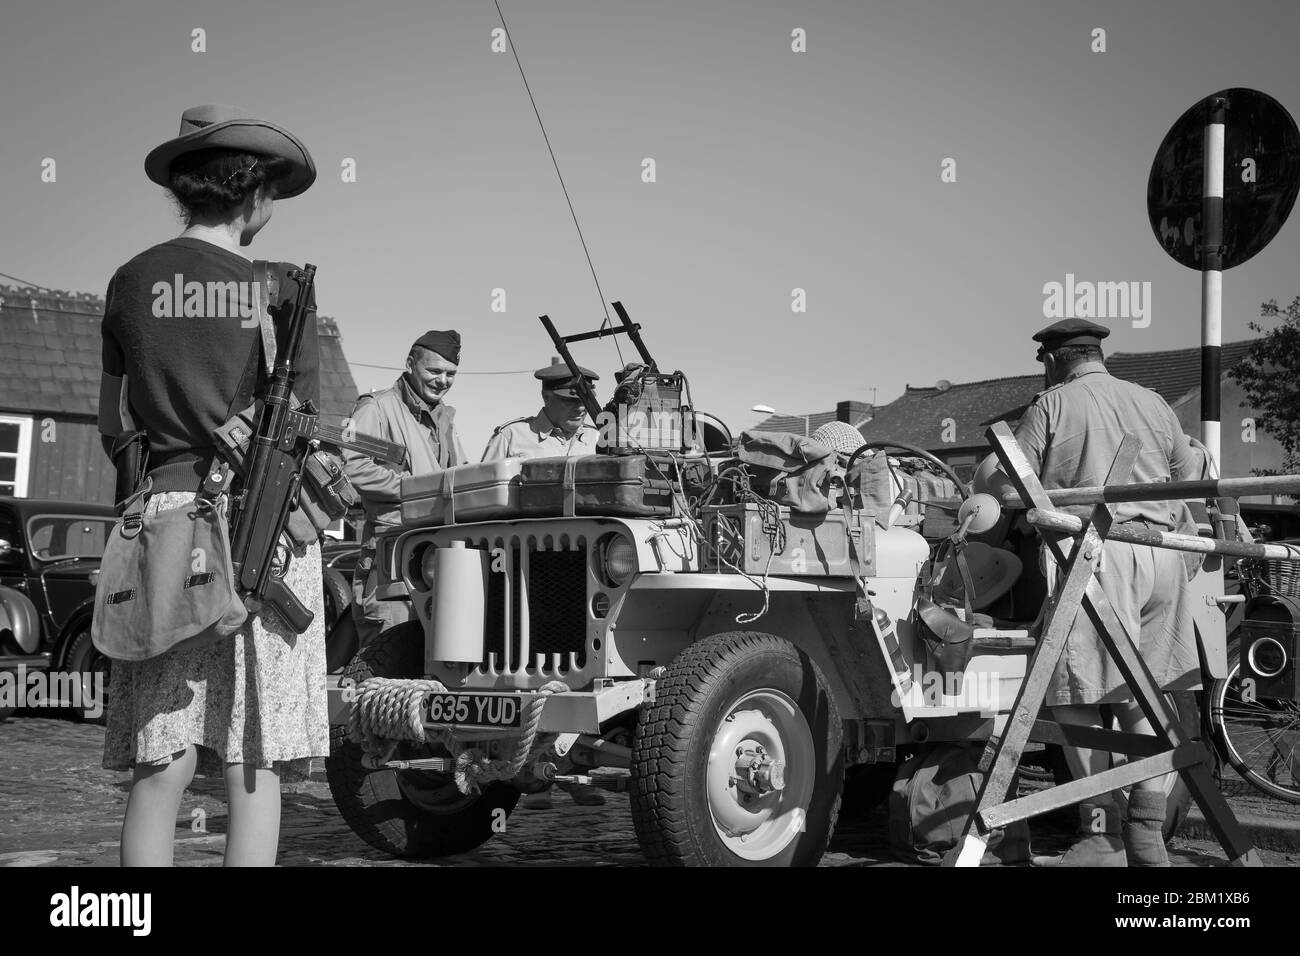 Monochrome front view of Willy's MB jeep, U.S.Army military vintage jeep on display Severn Valley Railway 1940s wartime WWII summer event, UK. Stock Photo